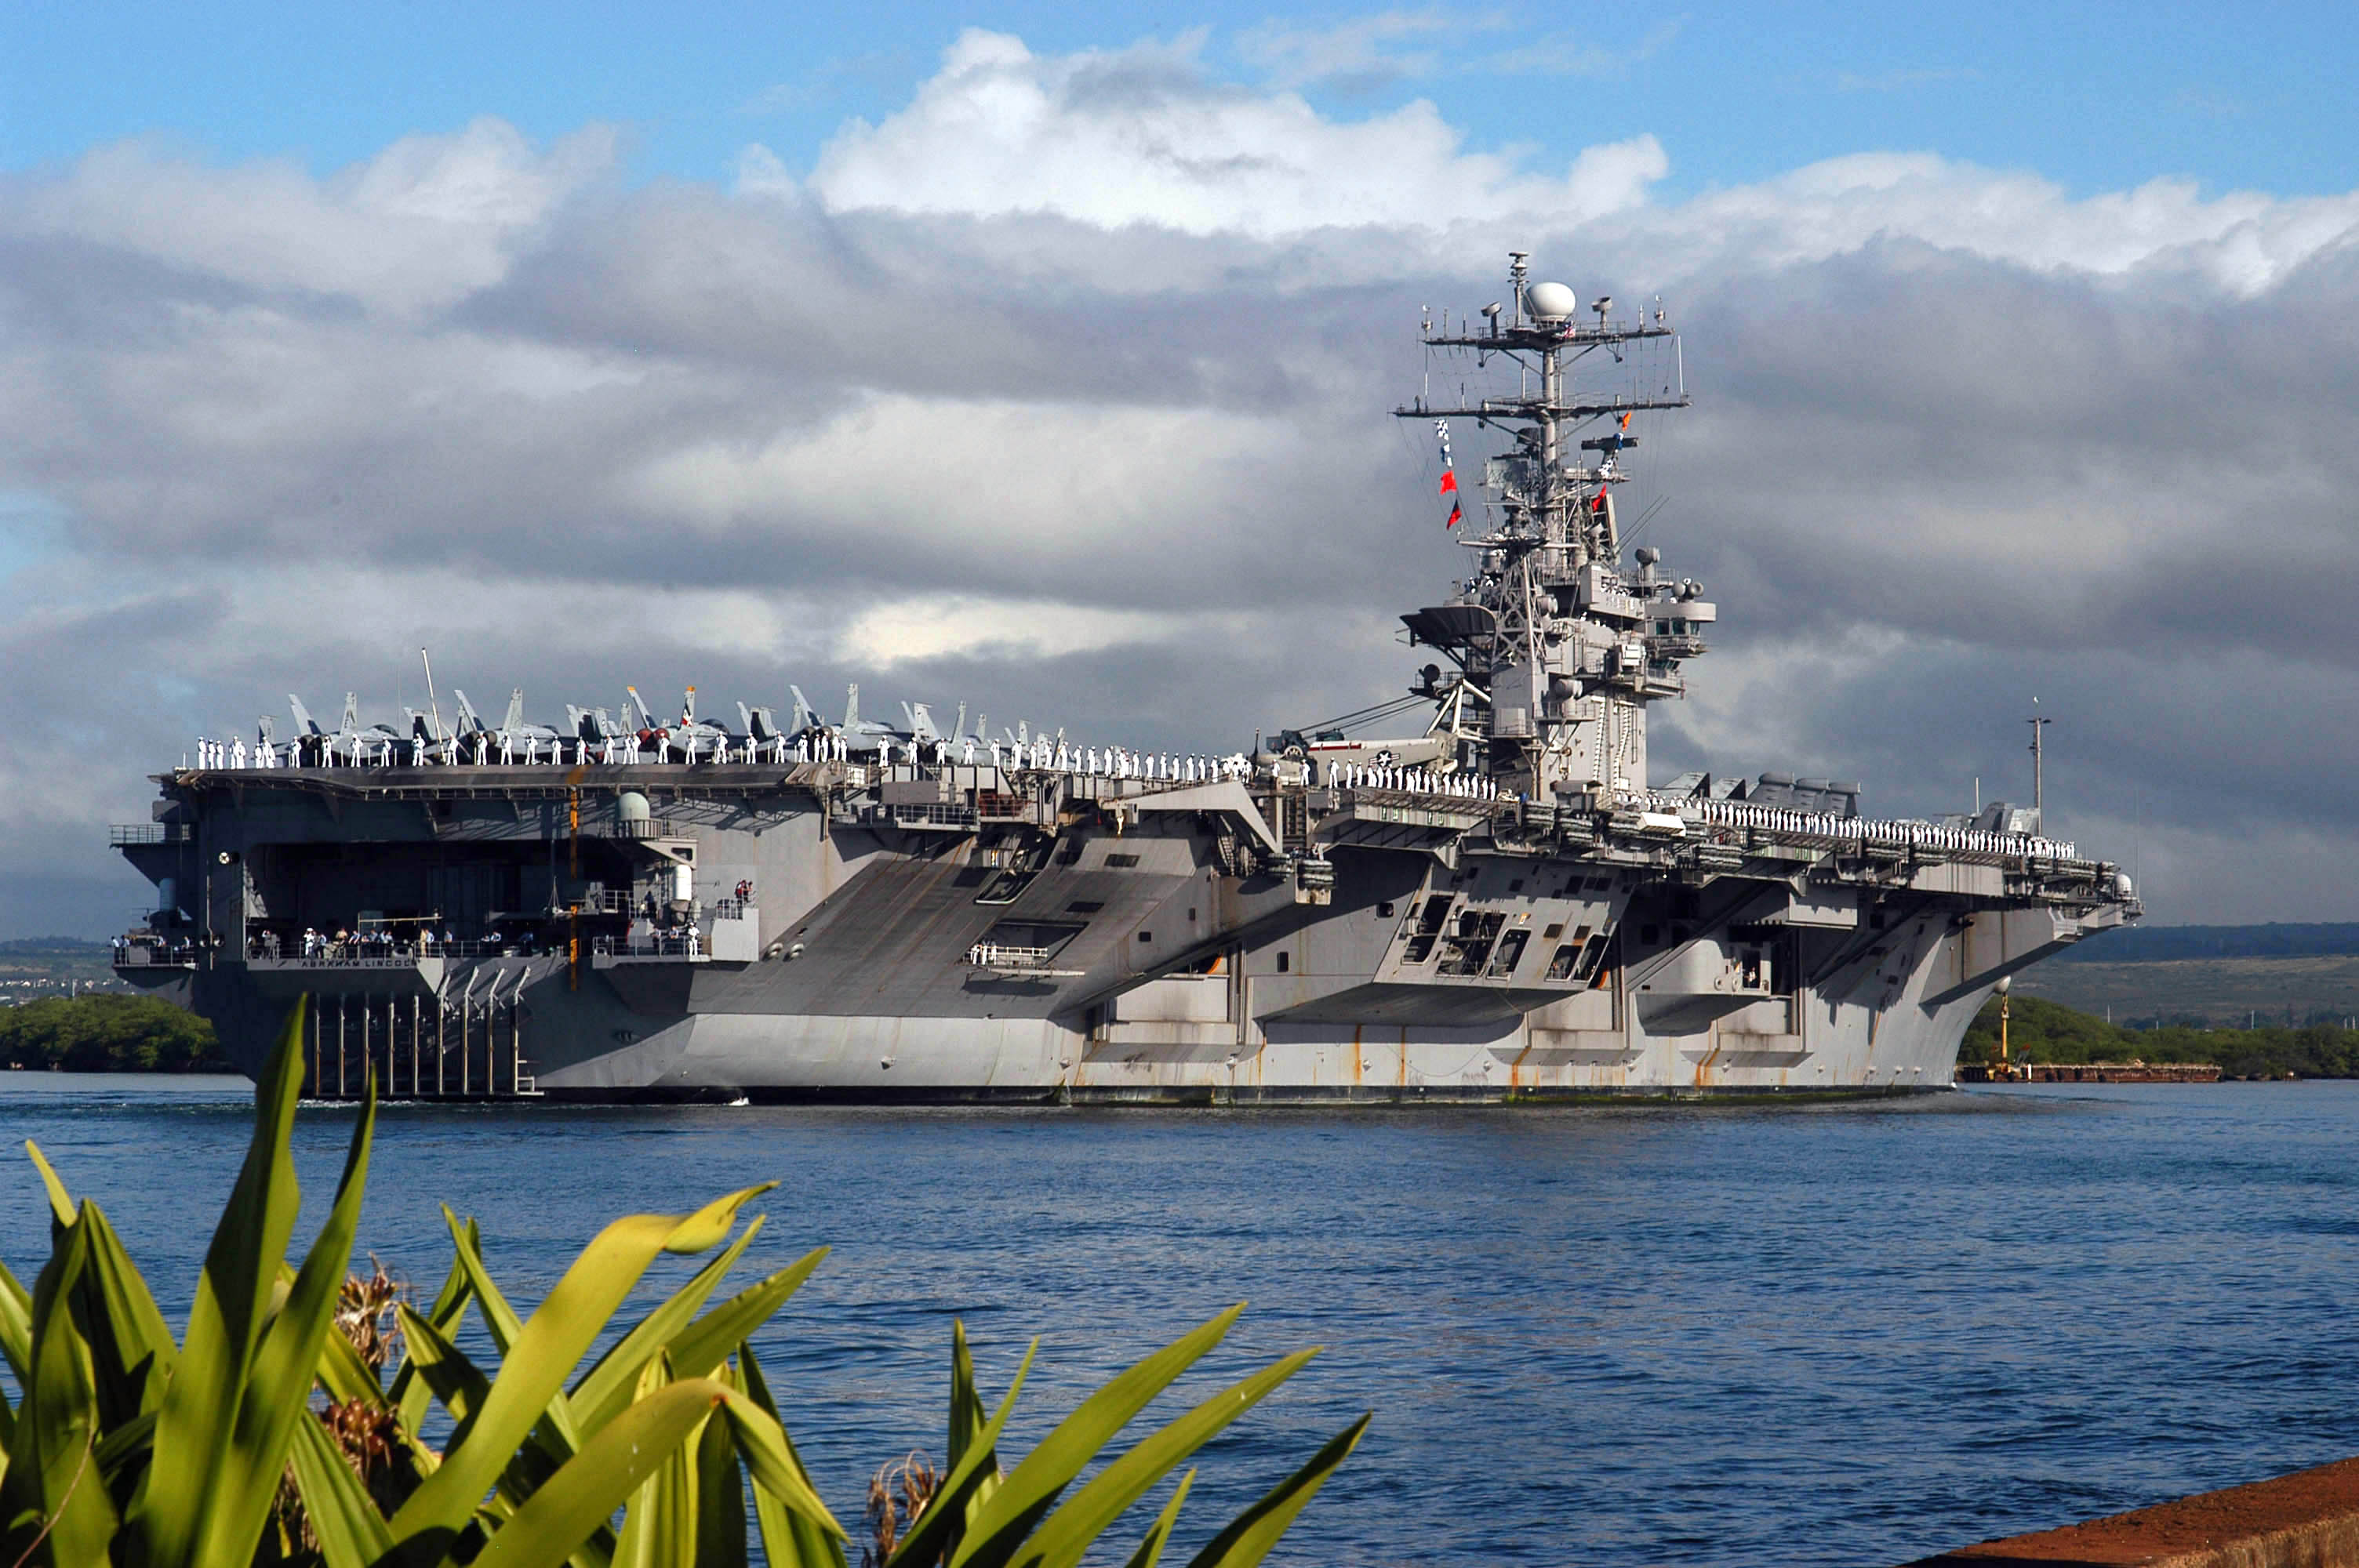 US Navy 050223-N-8157C-077 The Nimitz-class aircraft carrier USS Abraham Lincoln (CVN 72) arrives in Pearl Harbor, Hawaii for a port visit